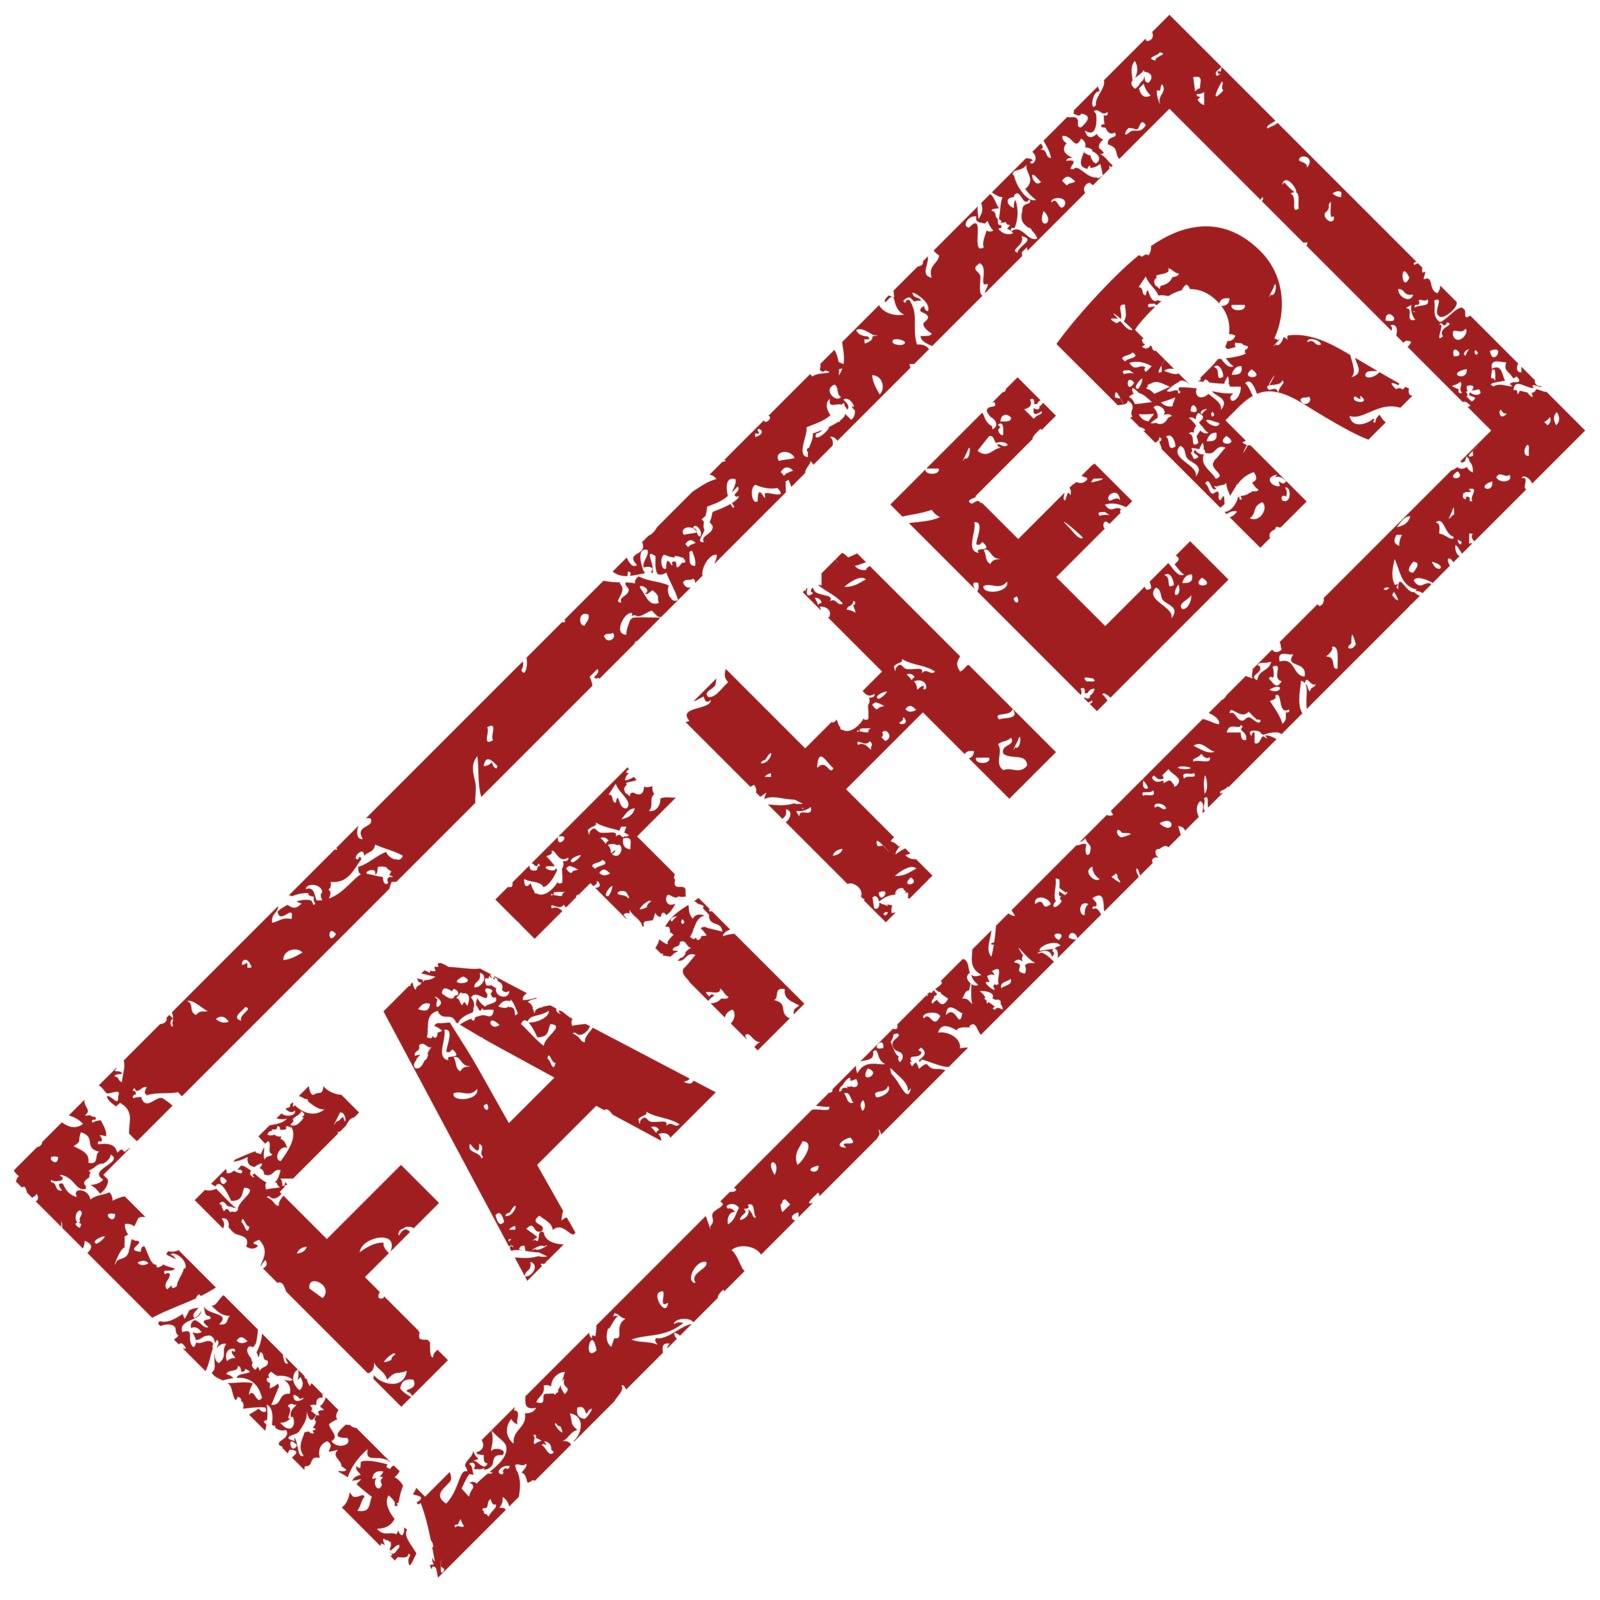 Father grunge rubber stamp on a white background. Vector illustration